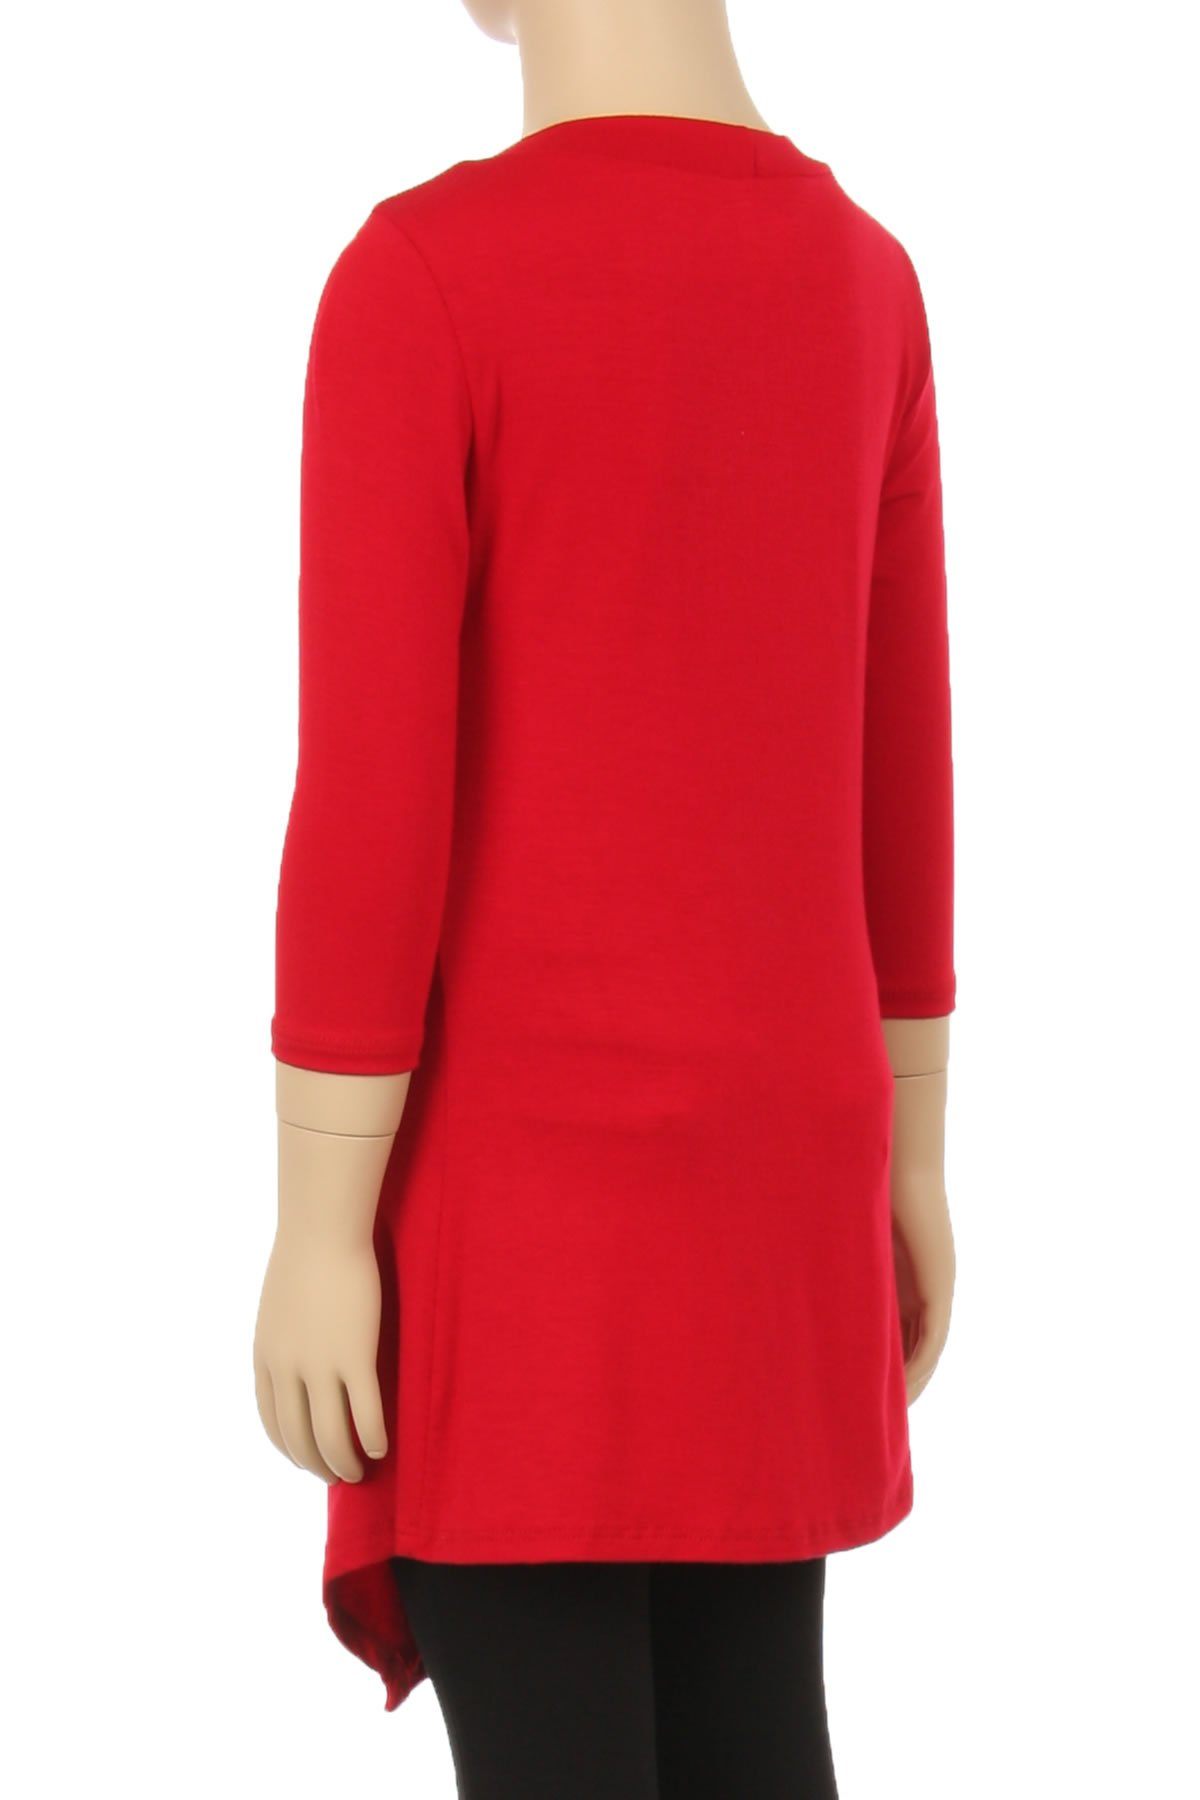 Girls Solid Red Dress Asymmetric 3/4 Sleeve Tunic Top Tops MomMe and More 